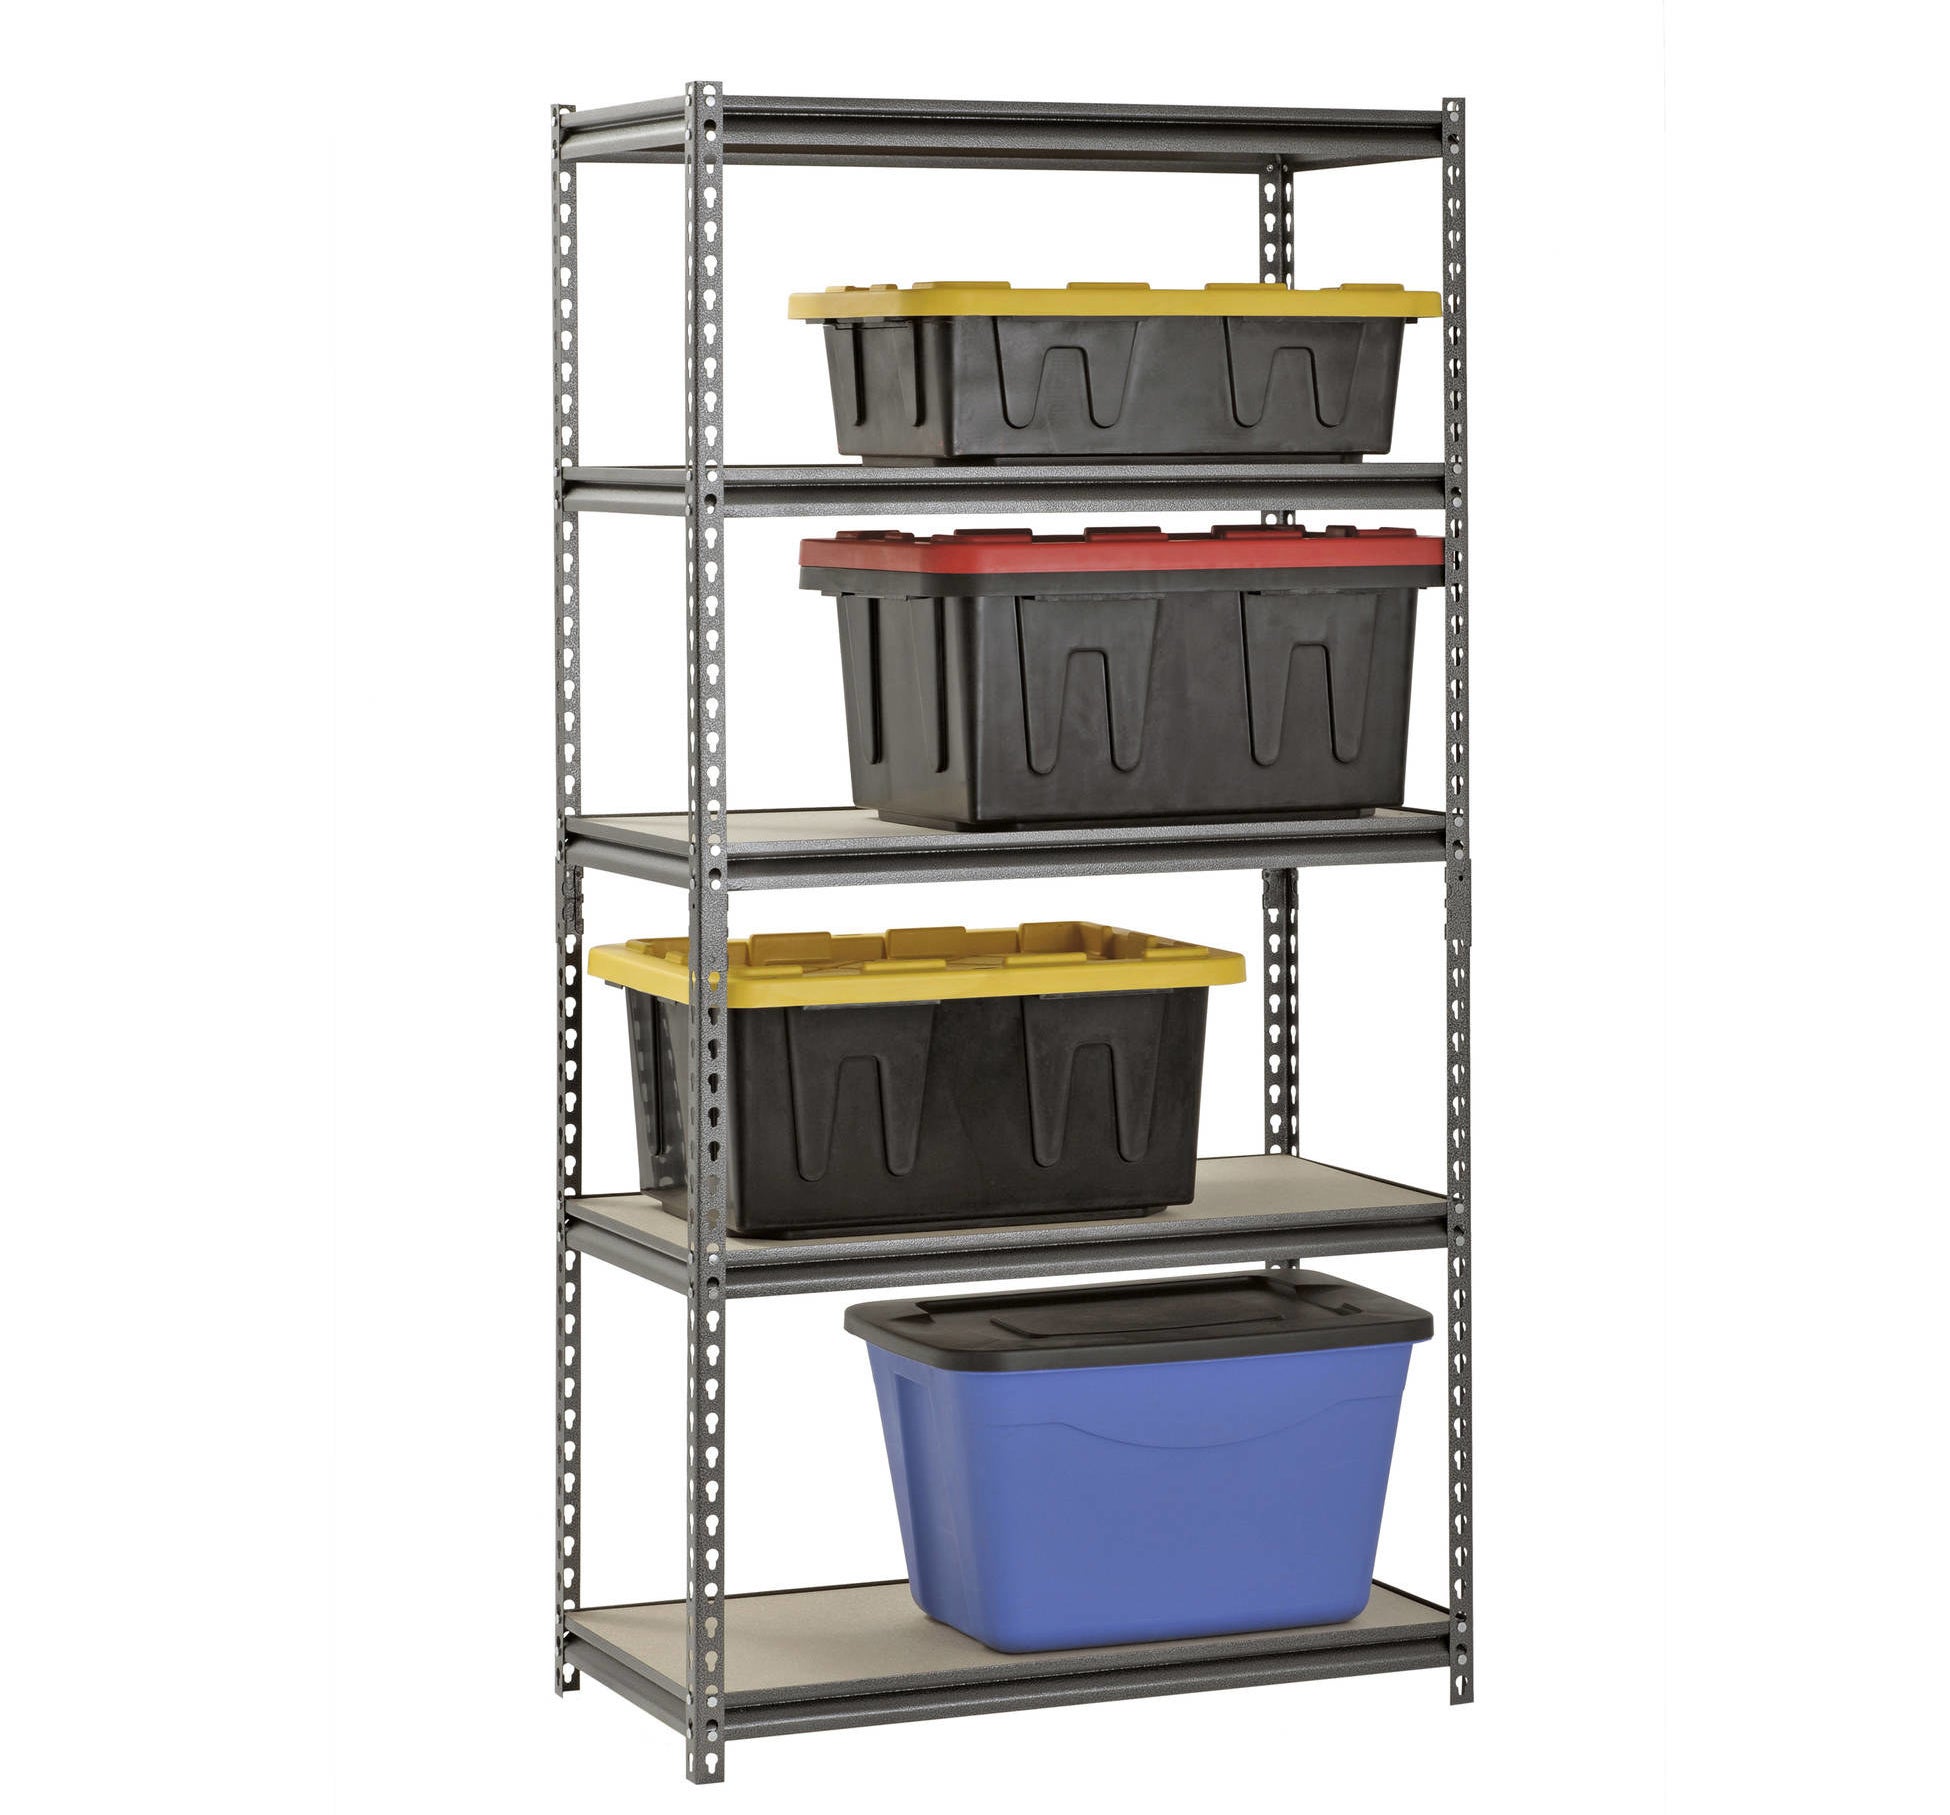 steel shelving unit that holds plastic storage boxes